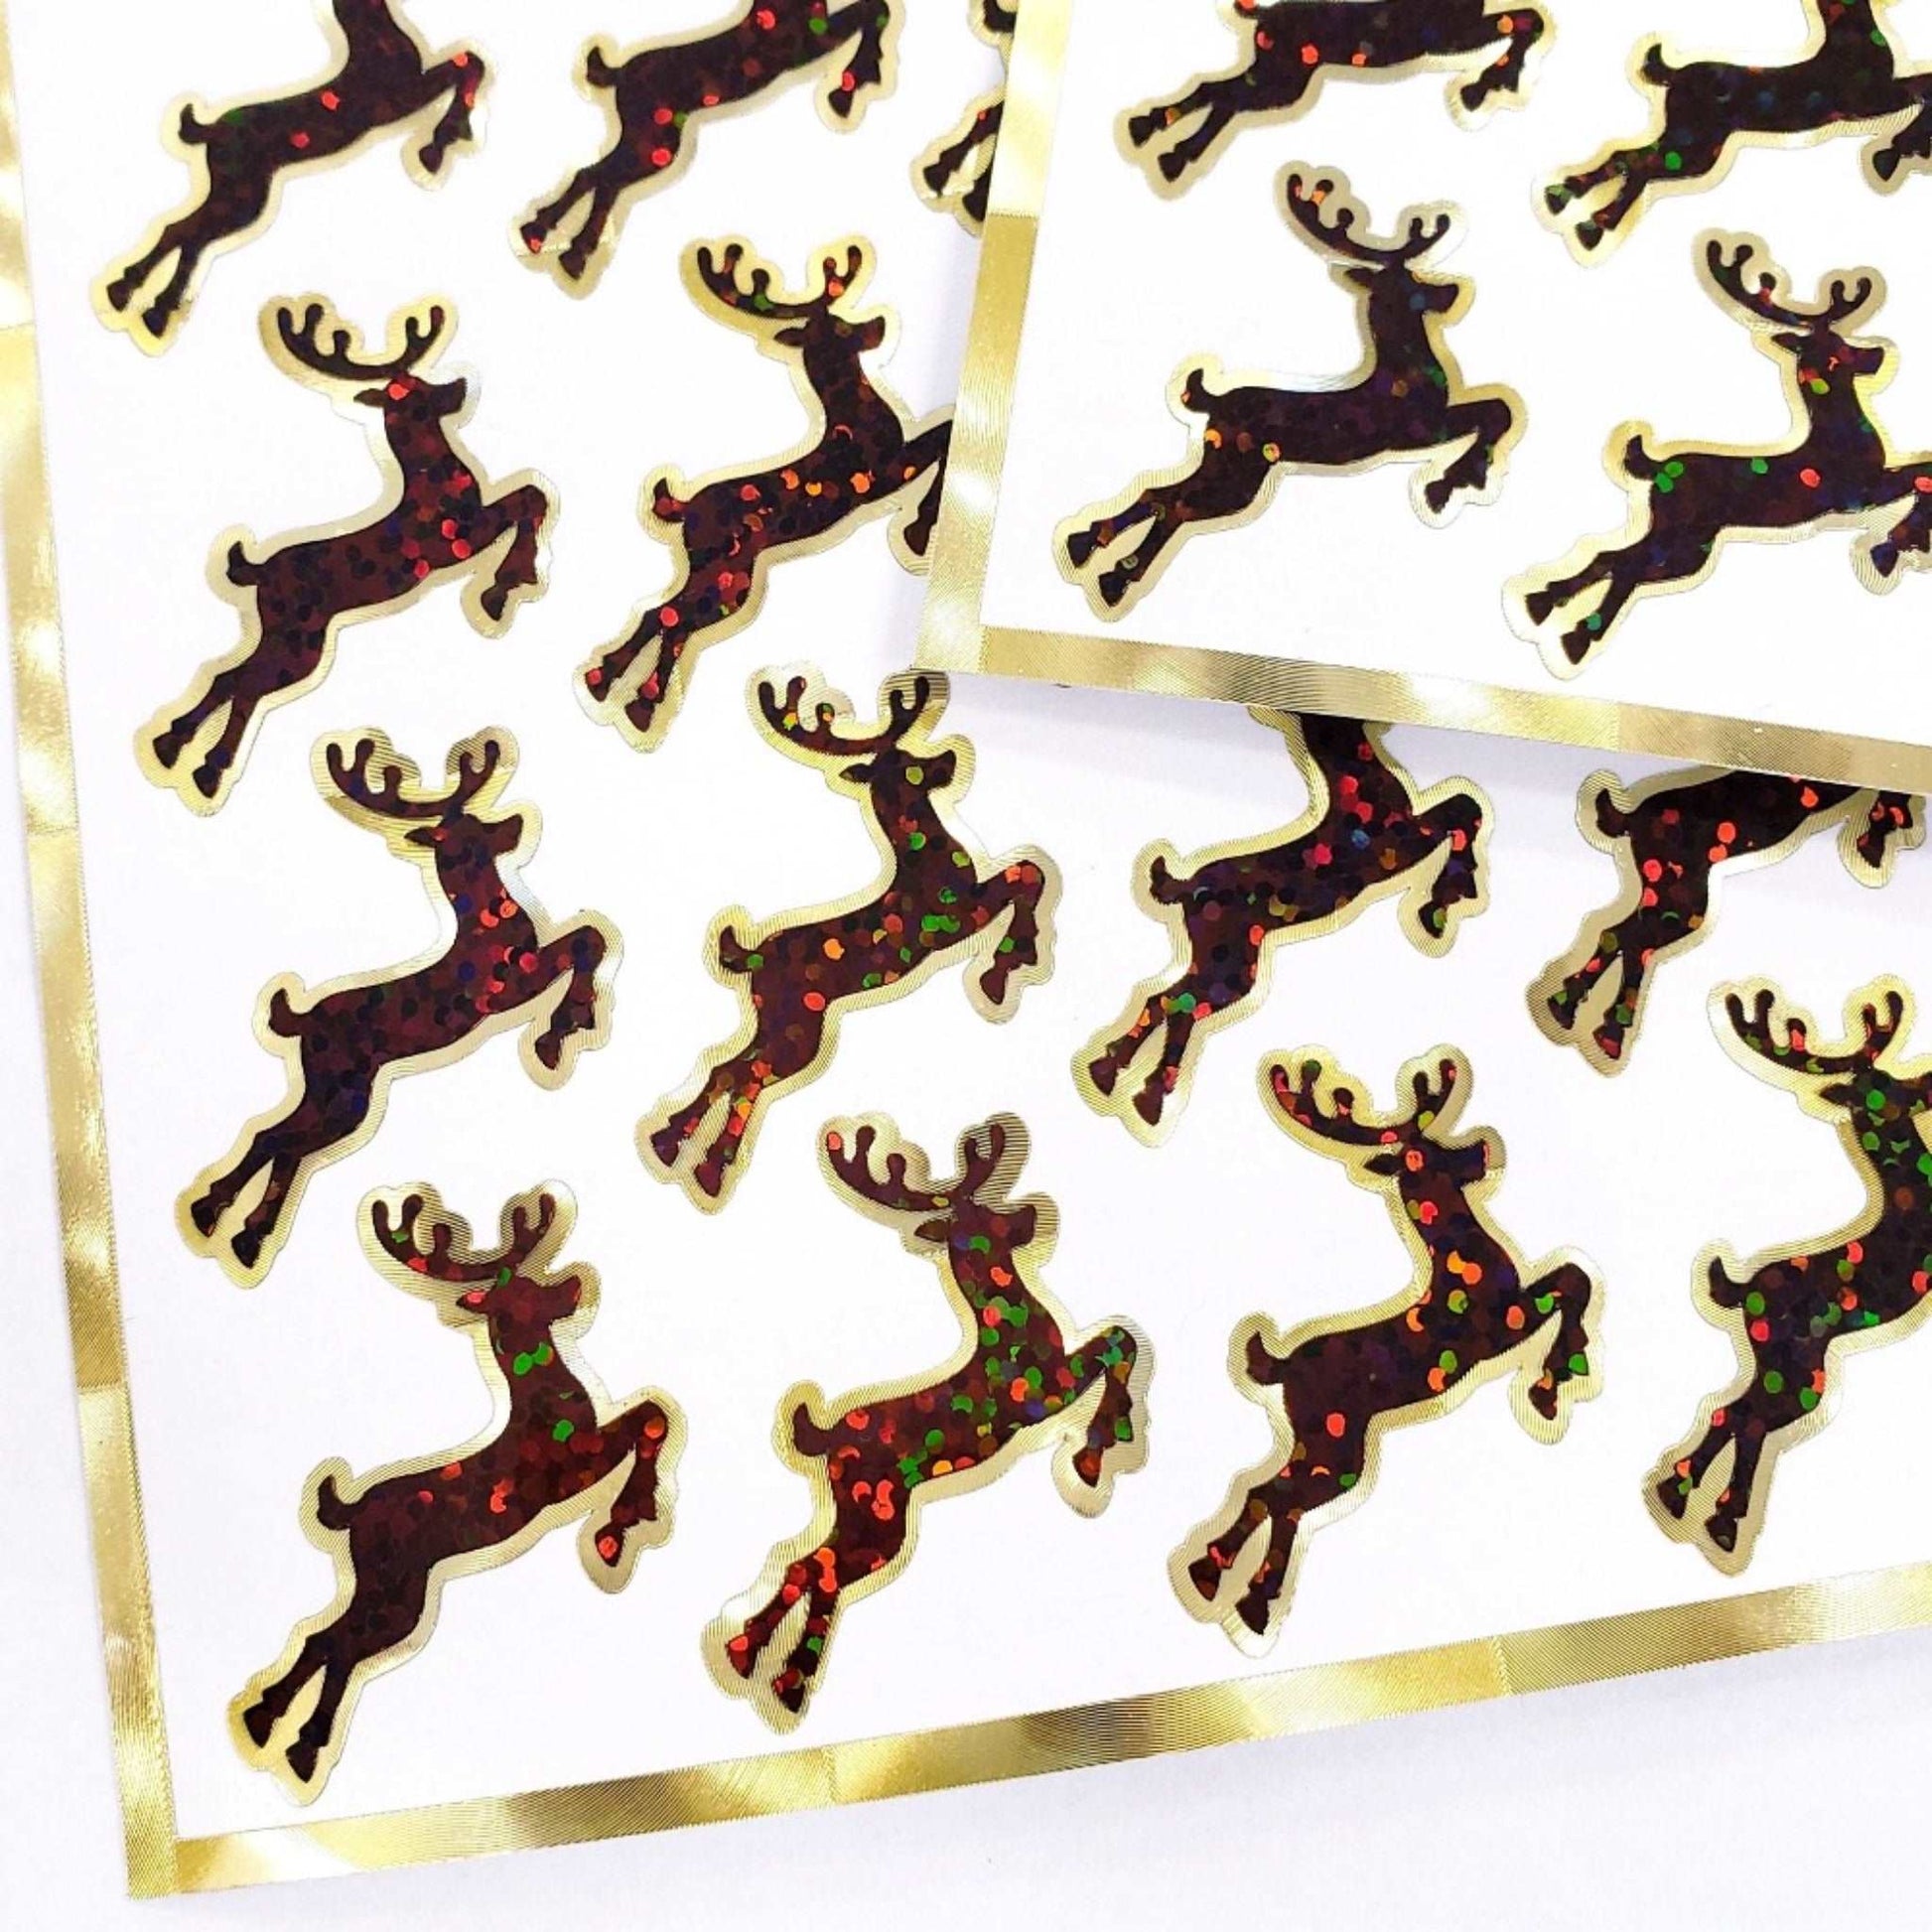 Reindeer Stickers, set of 24 brown and gold deer stickers for holiday cards, invitations, envelopes, Christmas advent calendars and crafts.